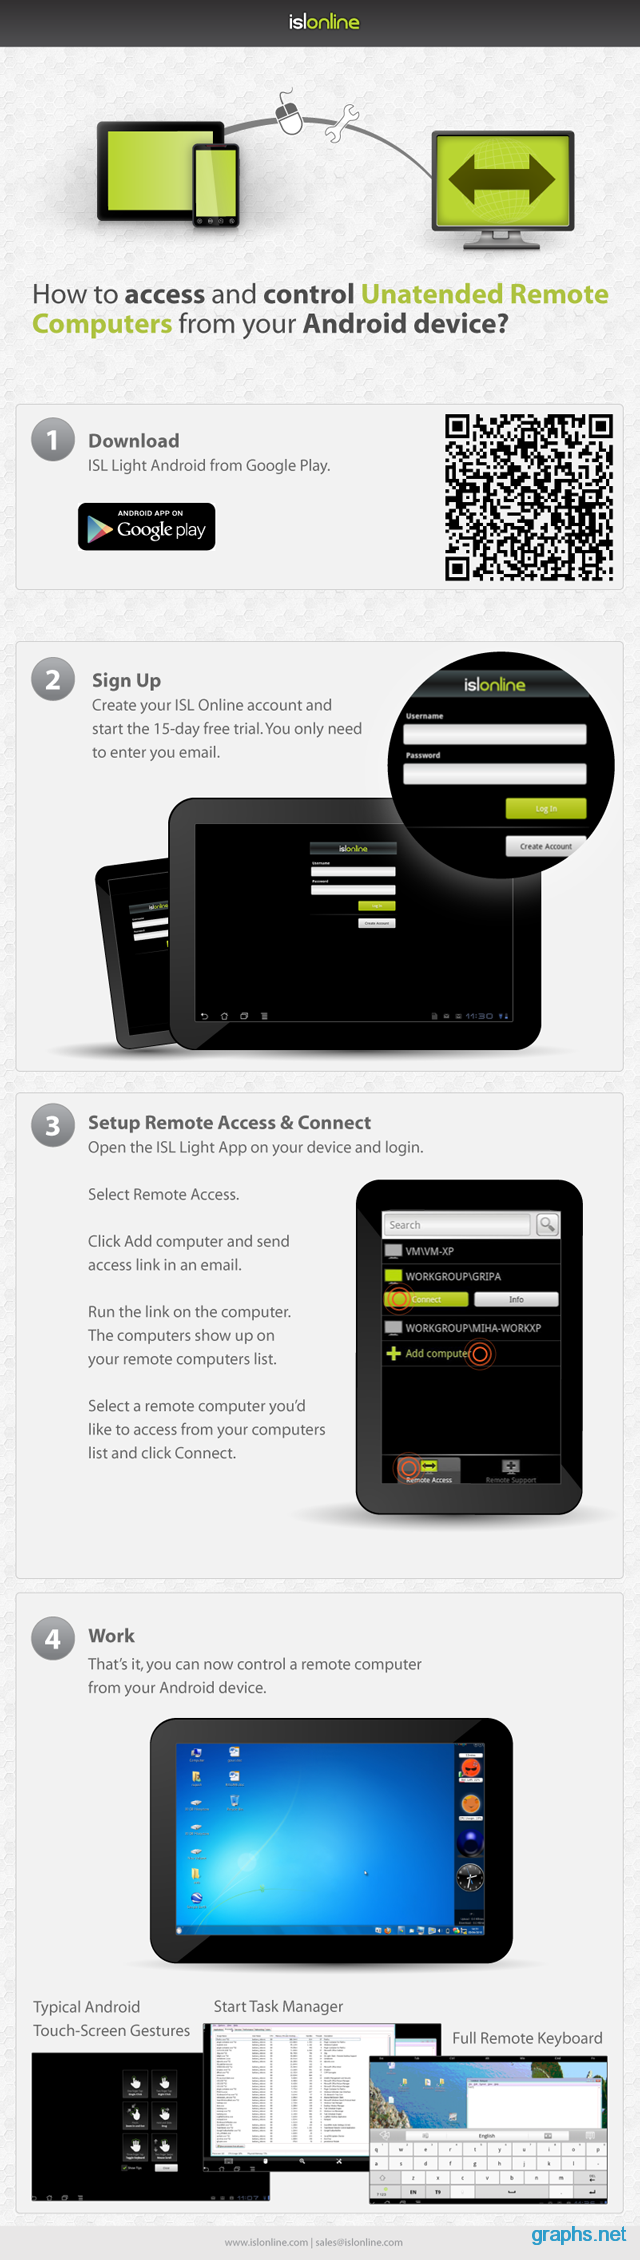 remote access Unattended Remote Computers from android device